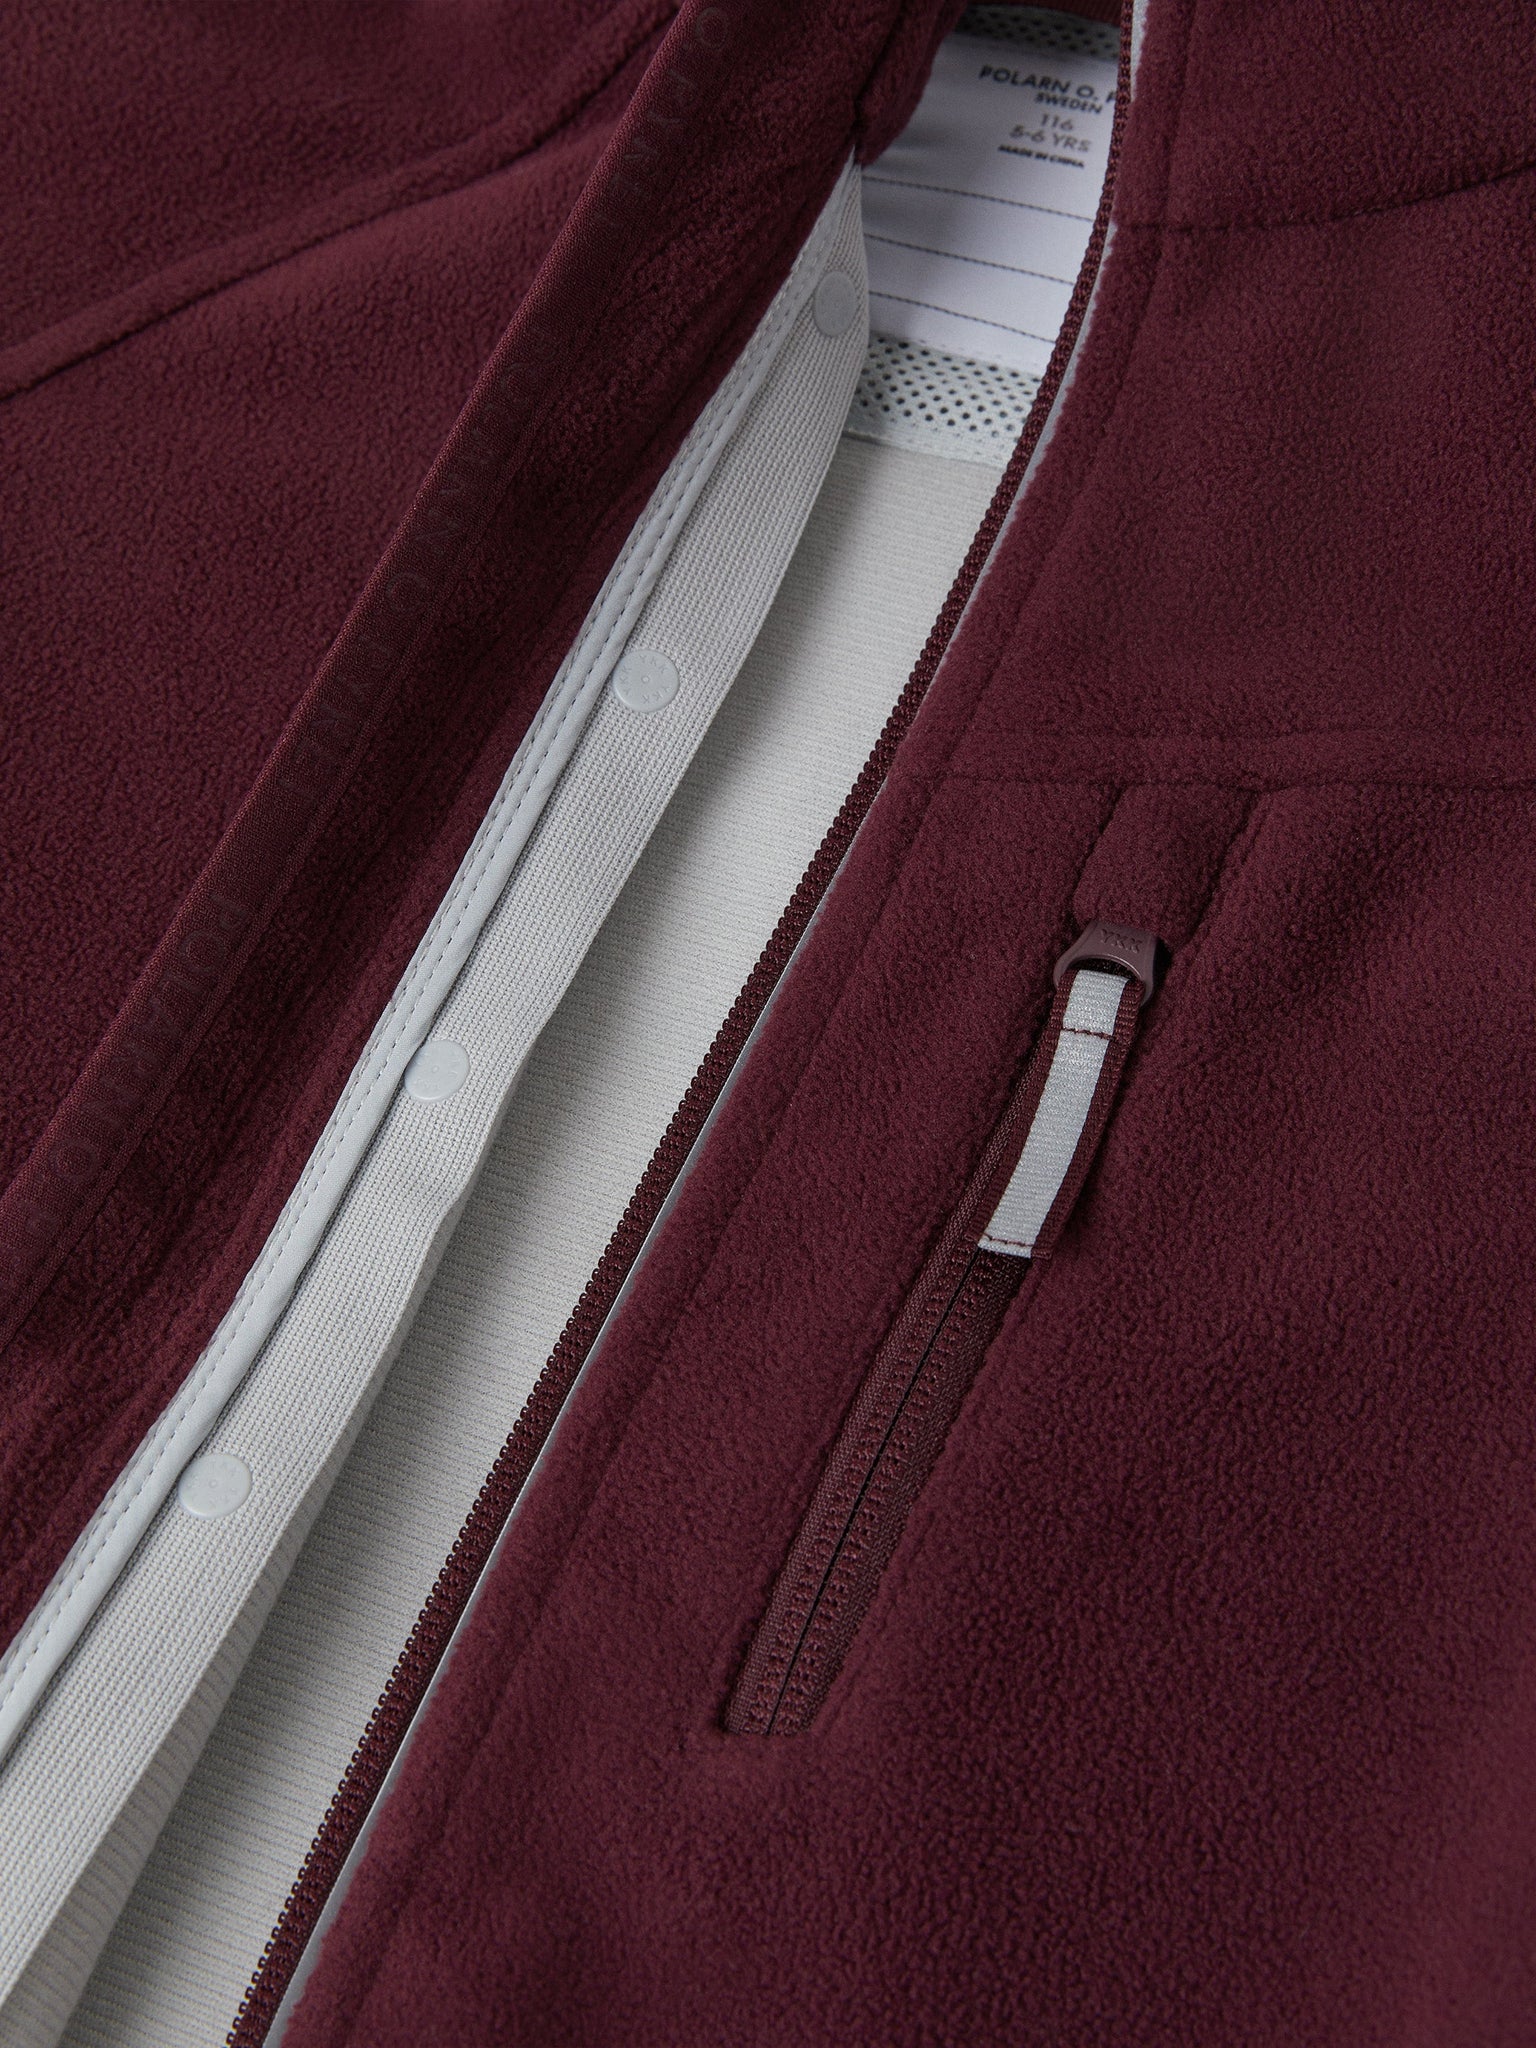 Burgundy Waterproof Kids Fleece Jacket from the Polarn O. Pyret outerwear collection. Ethically produced kids outerwear.